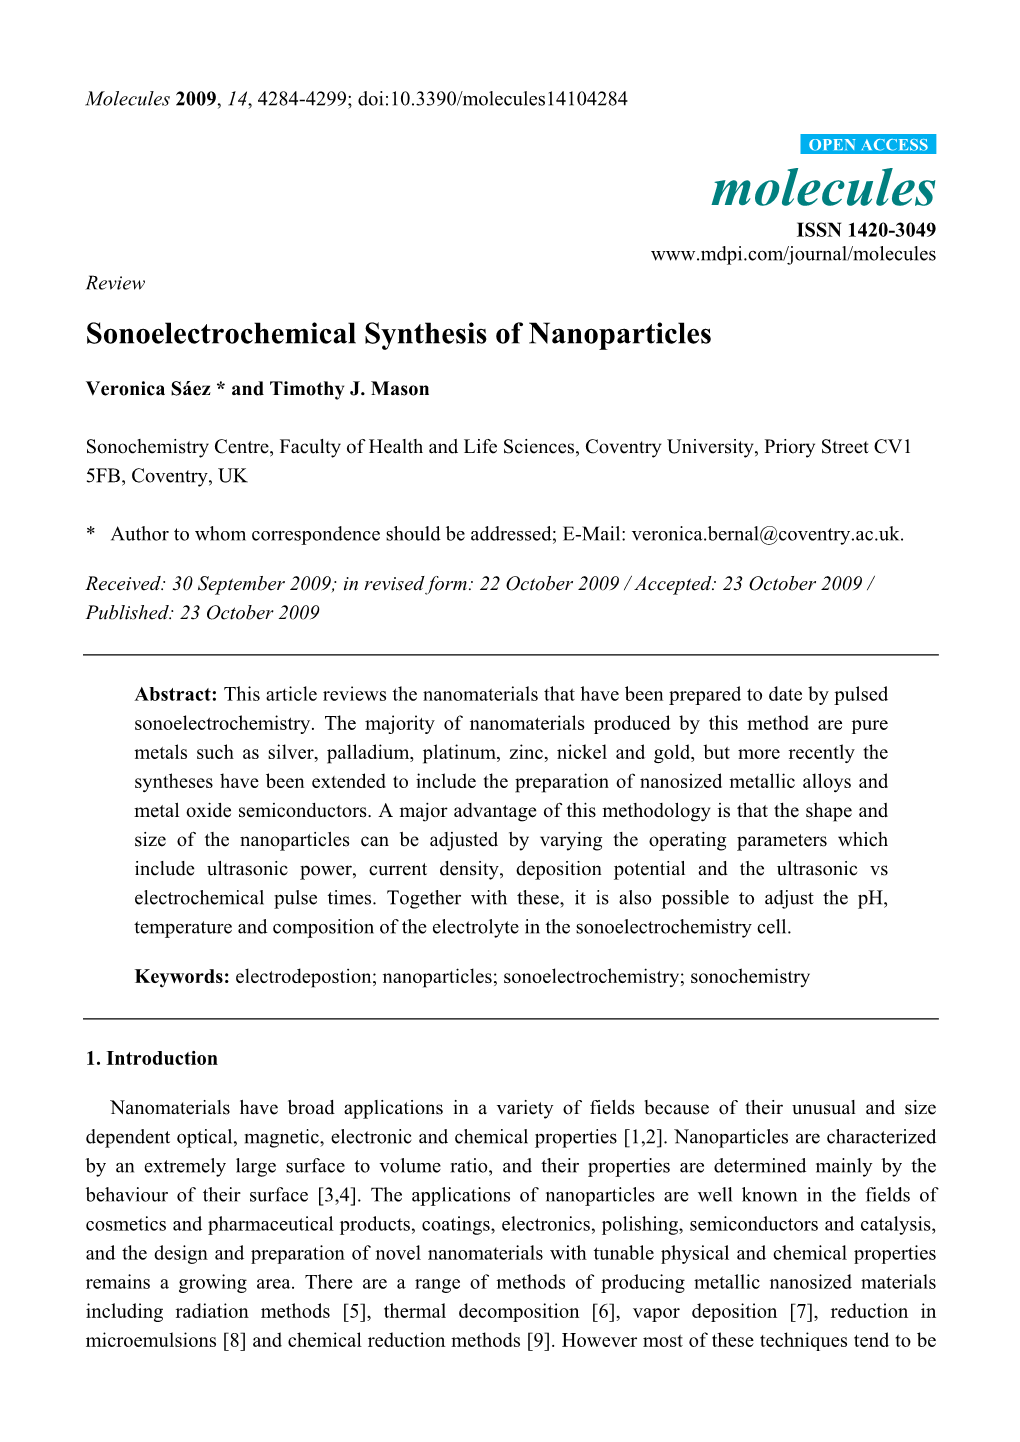 Sonoelectrochemical Synthesis of Nanoparticles